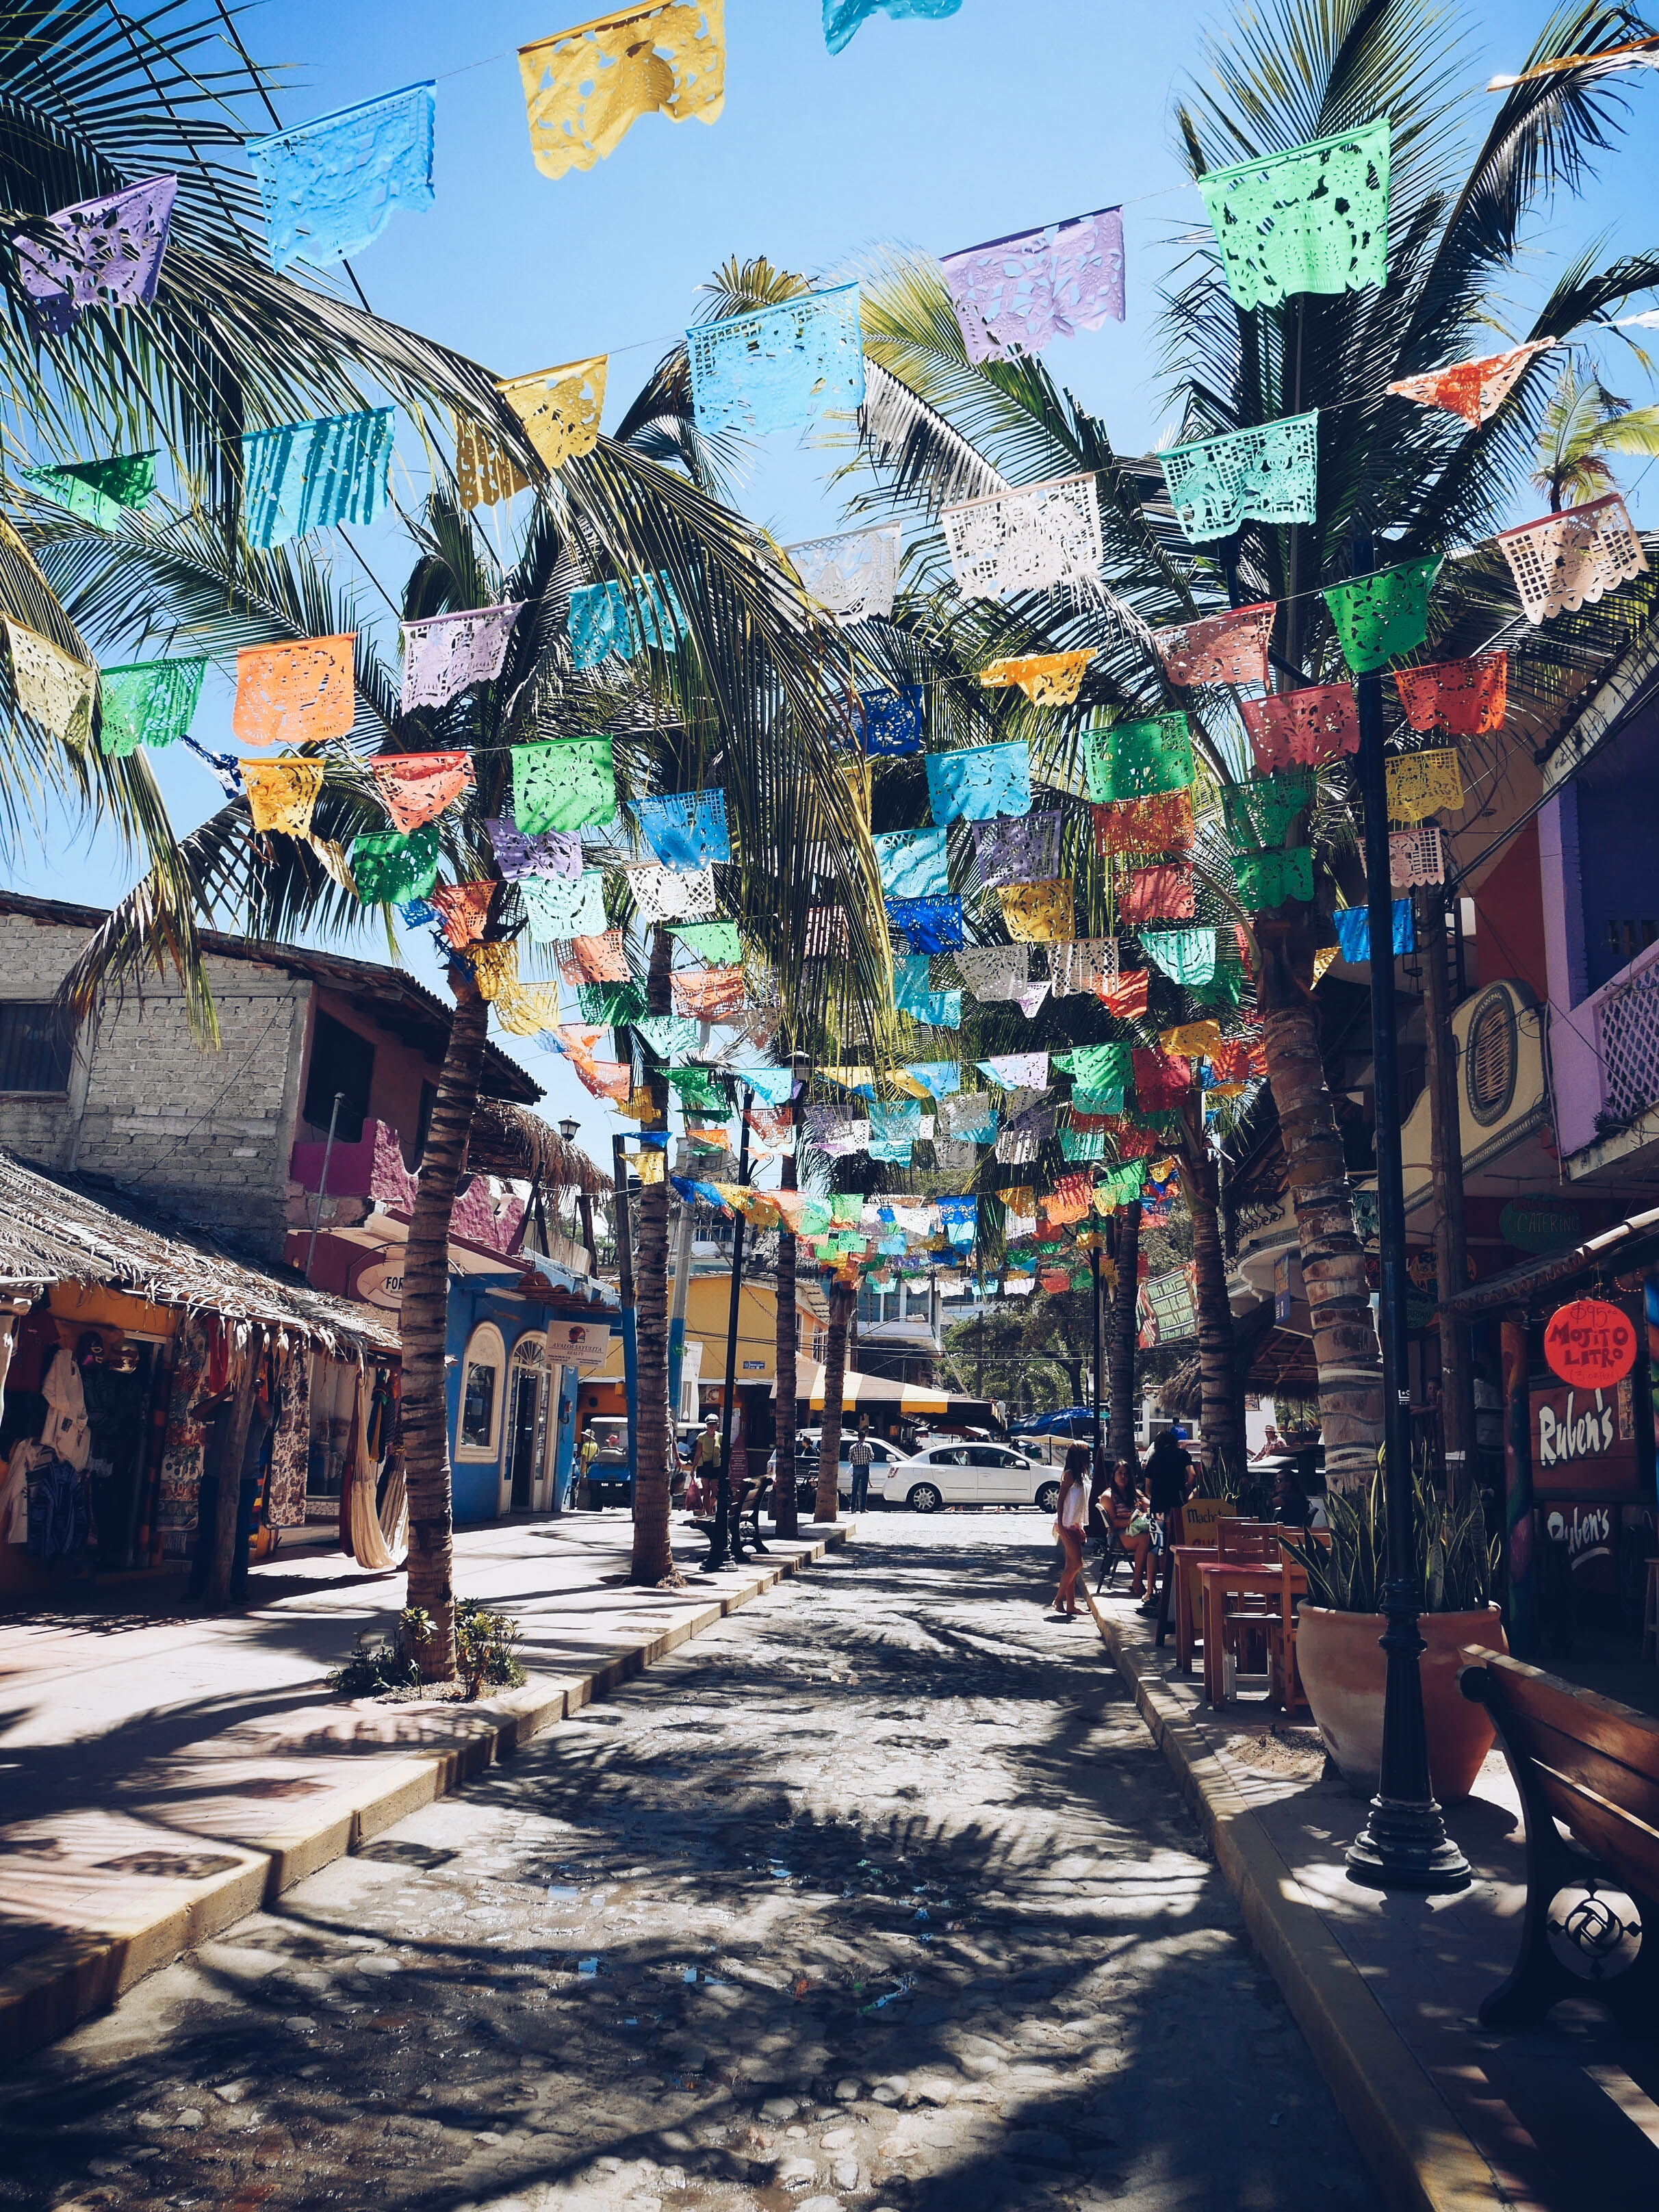 Sayulita Travel Guide - Insider’s Tips for an Amazing Trip image asset